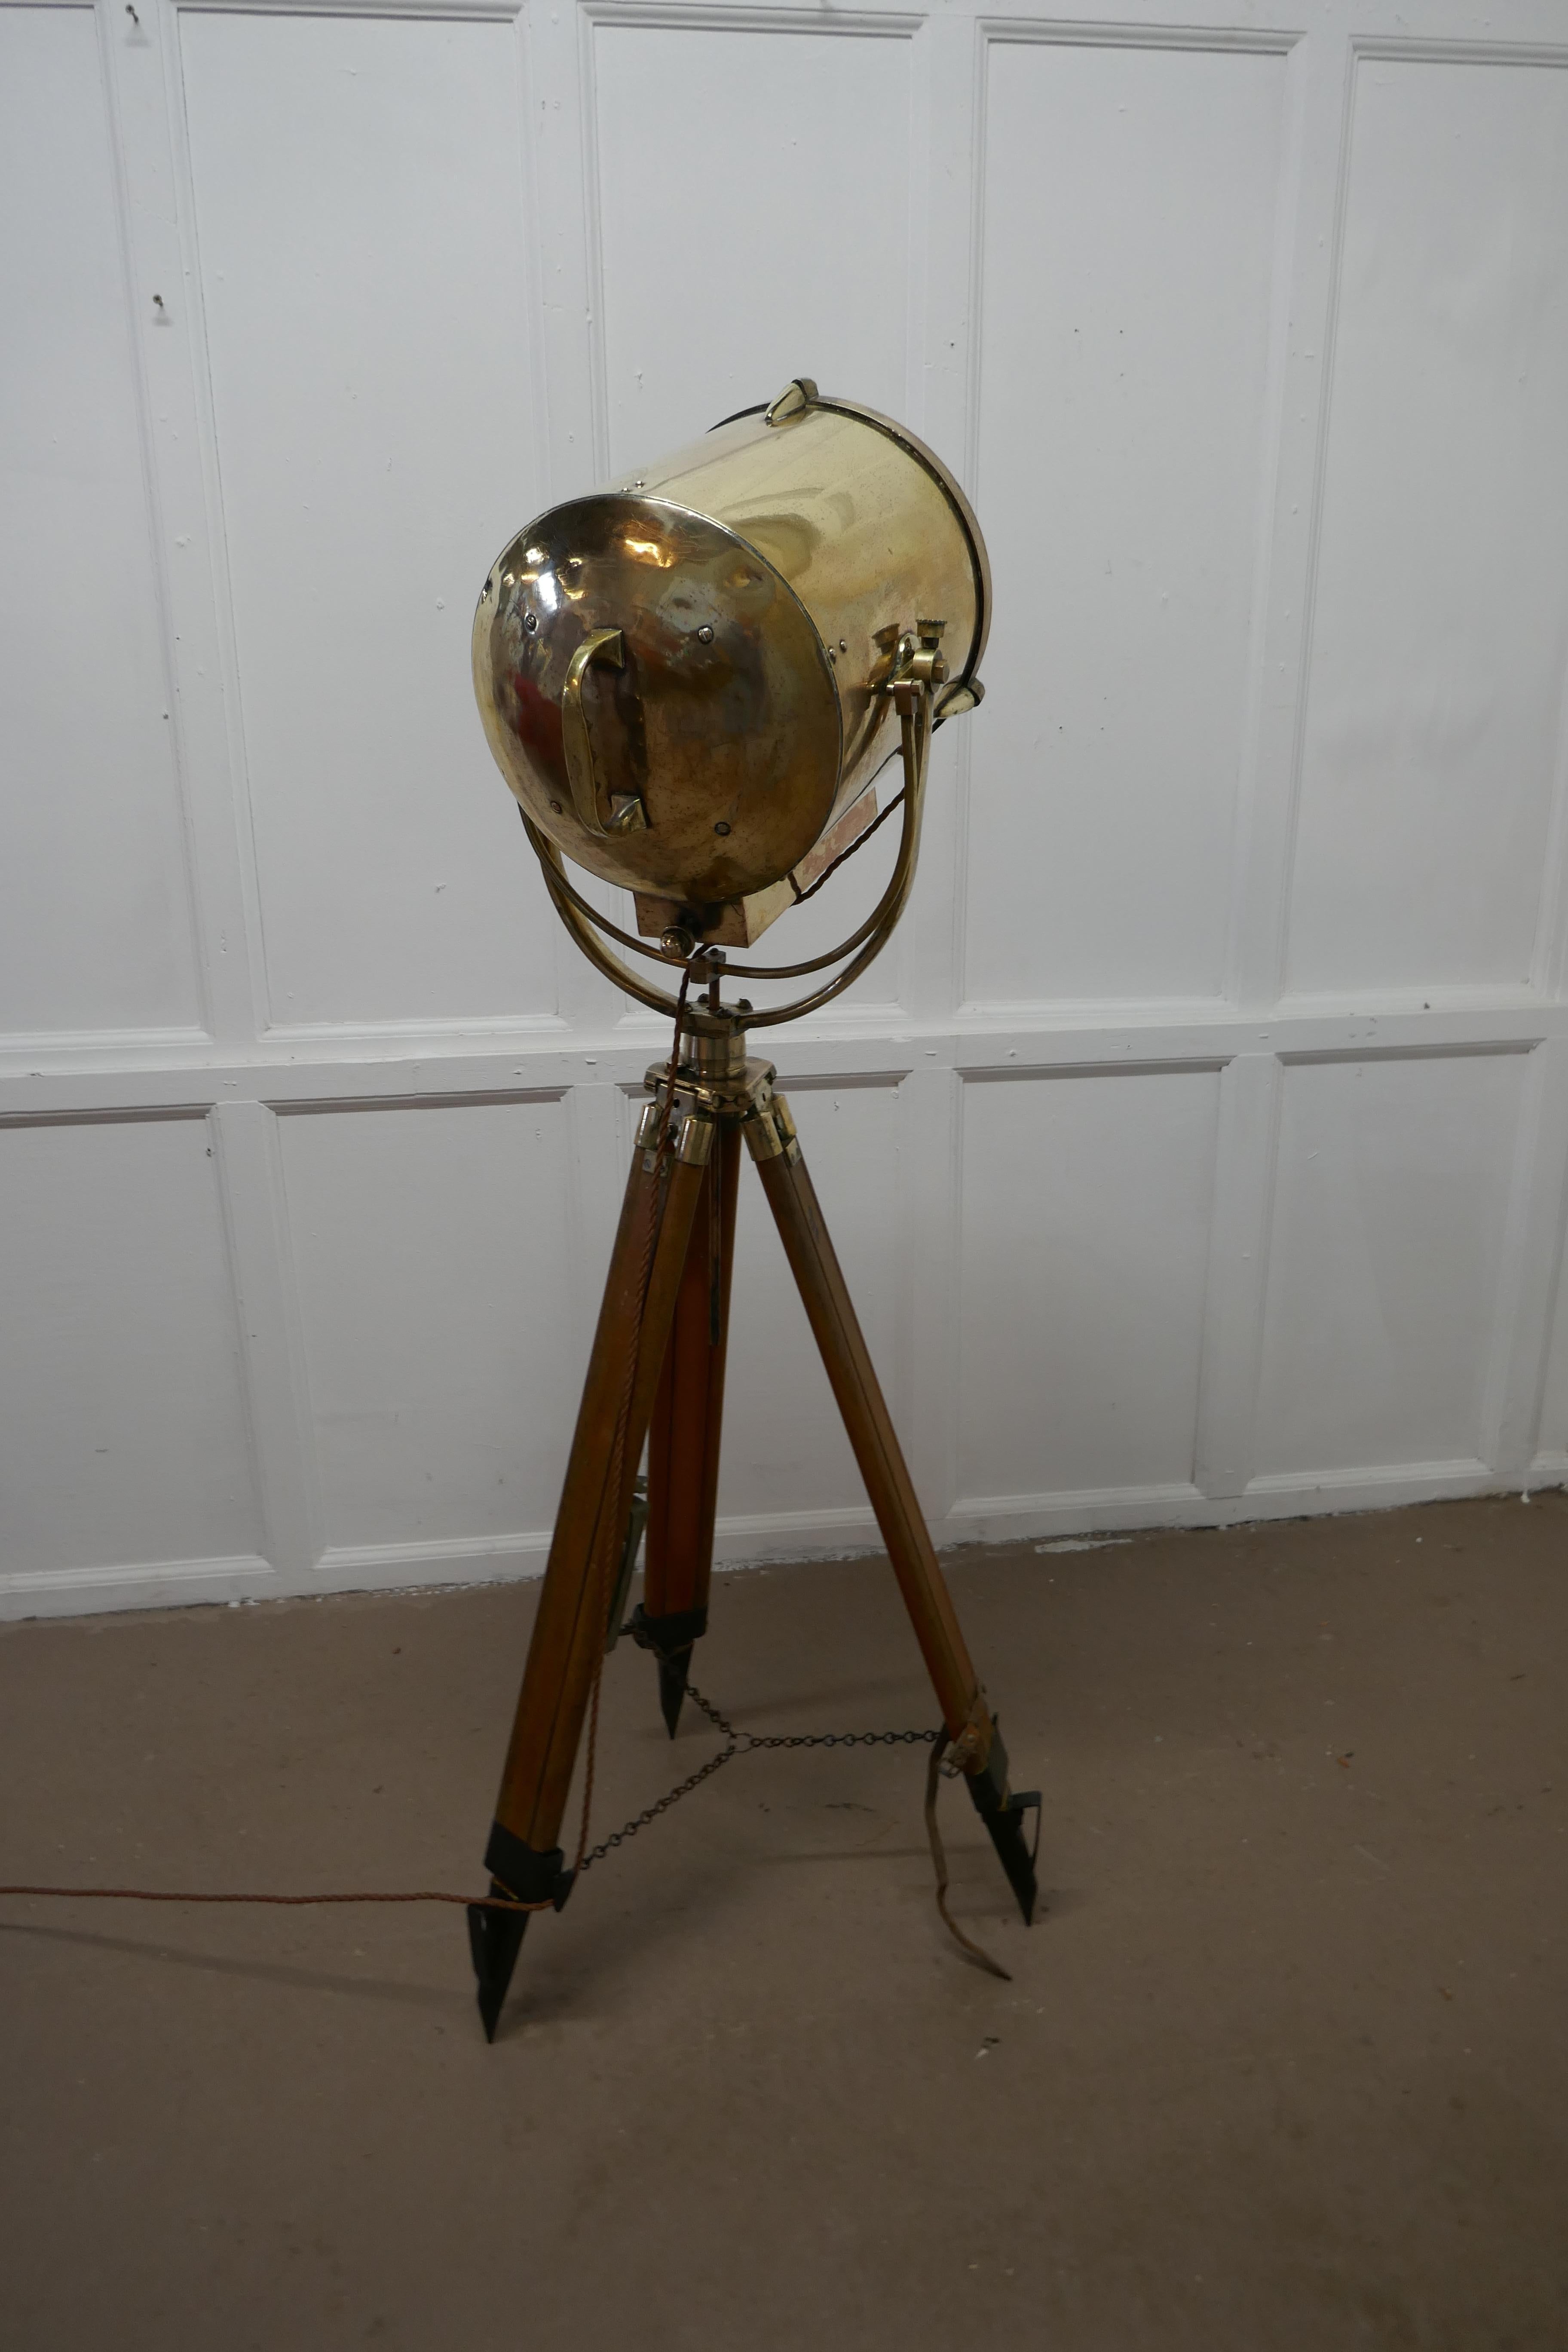 Very large 19th century vintage nautical search light or spot light by G Vieira

The Lamp is in brass it is very large and set on a wood and brass tripod, it is fully tilting and swiveling, it has makers plaque reading G Vieira Portugal 
The